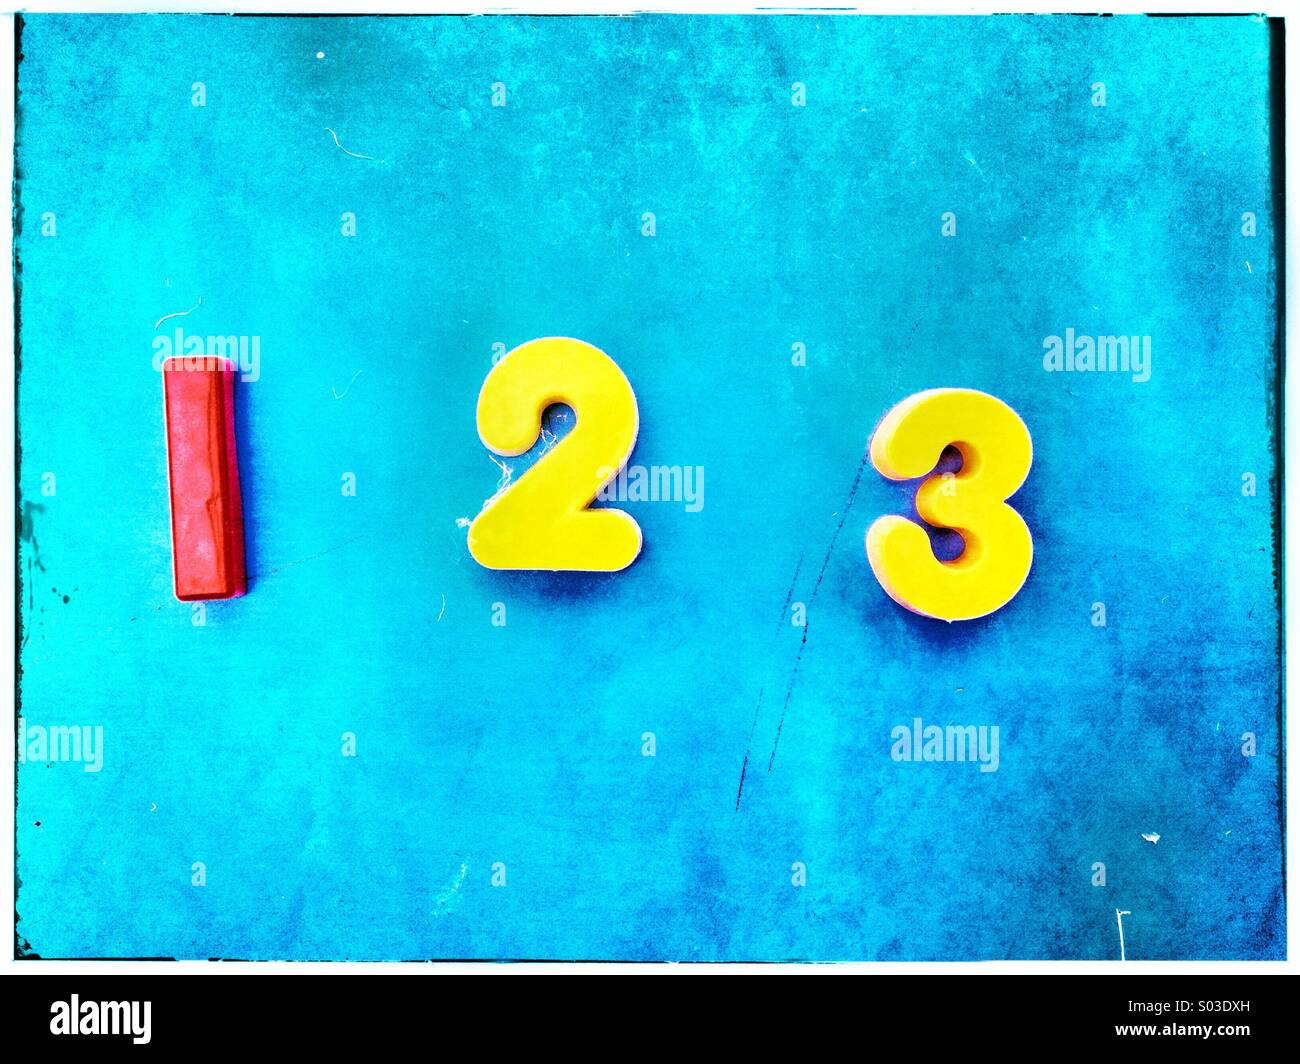 1 2 3 written with magnetic letters Stock Photo - Alamy